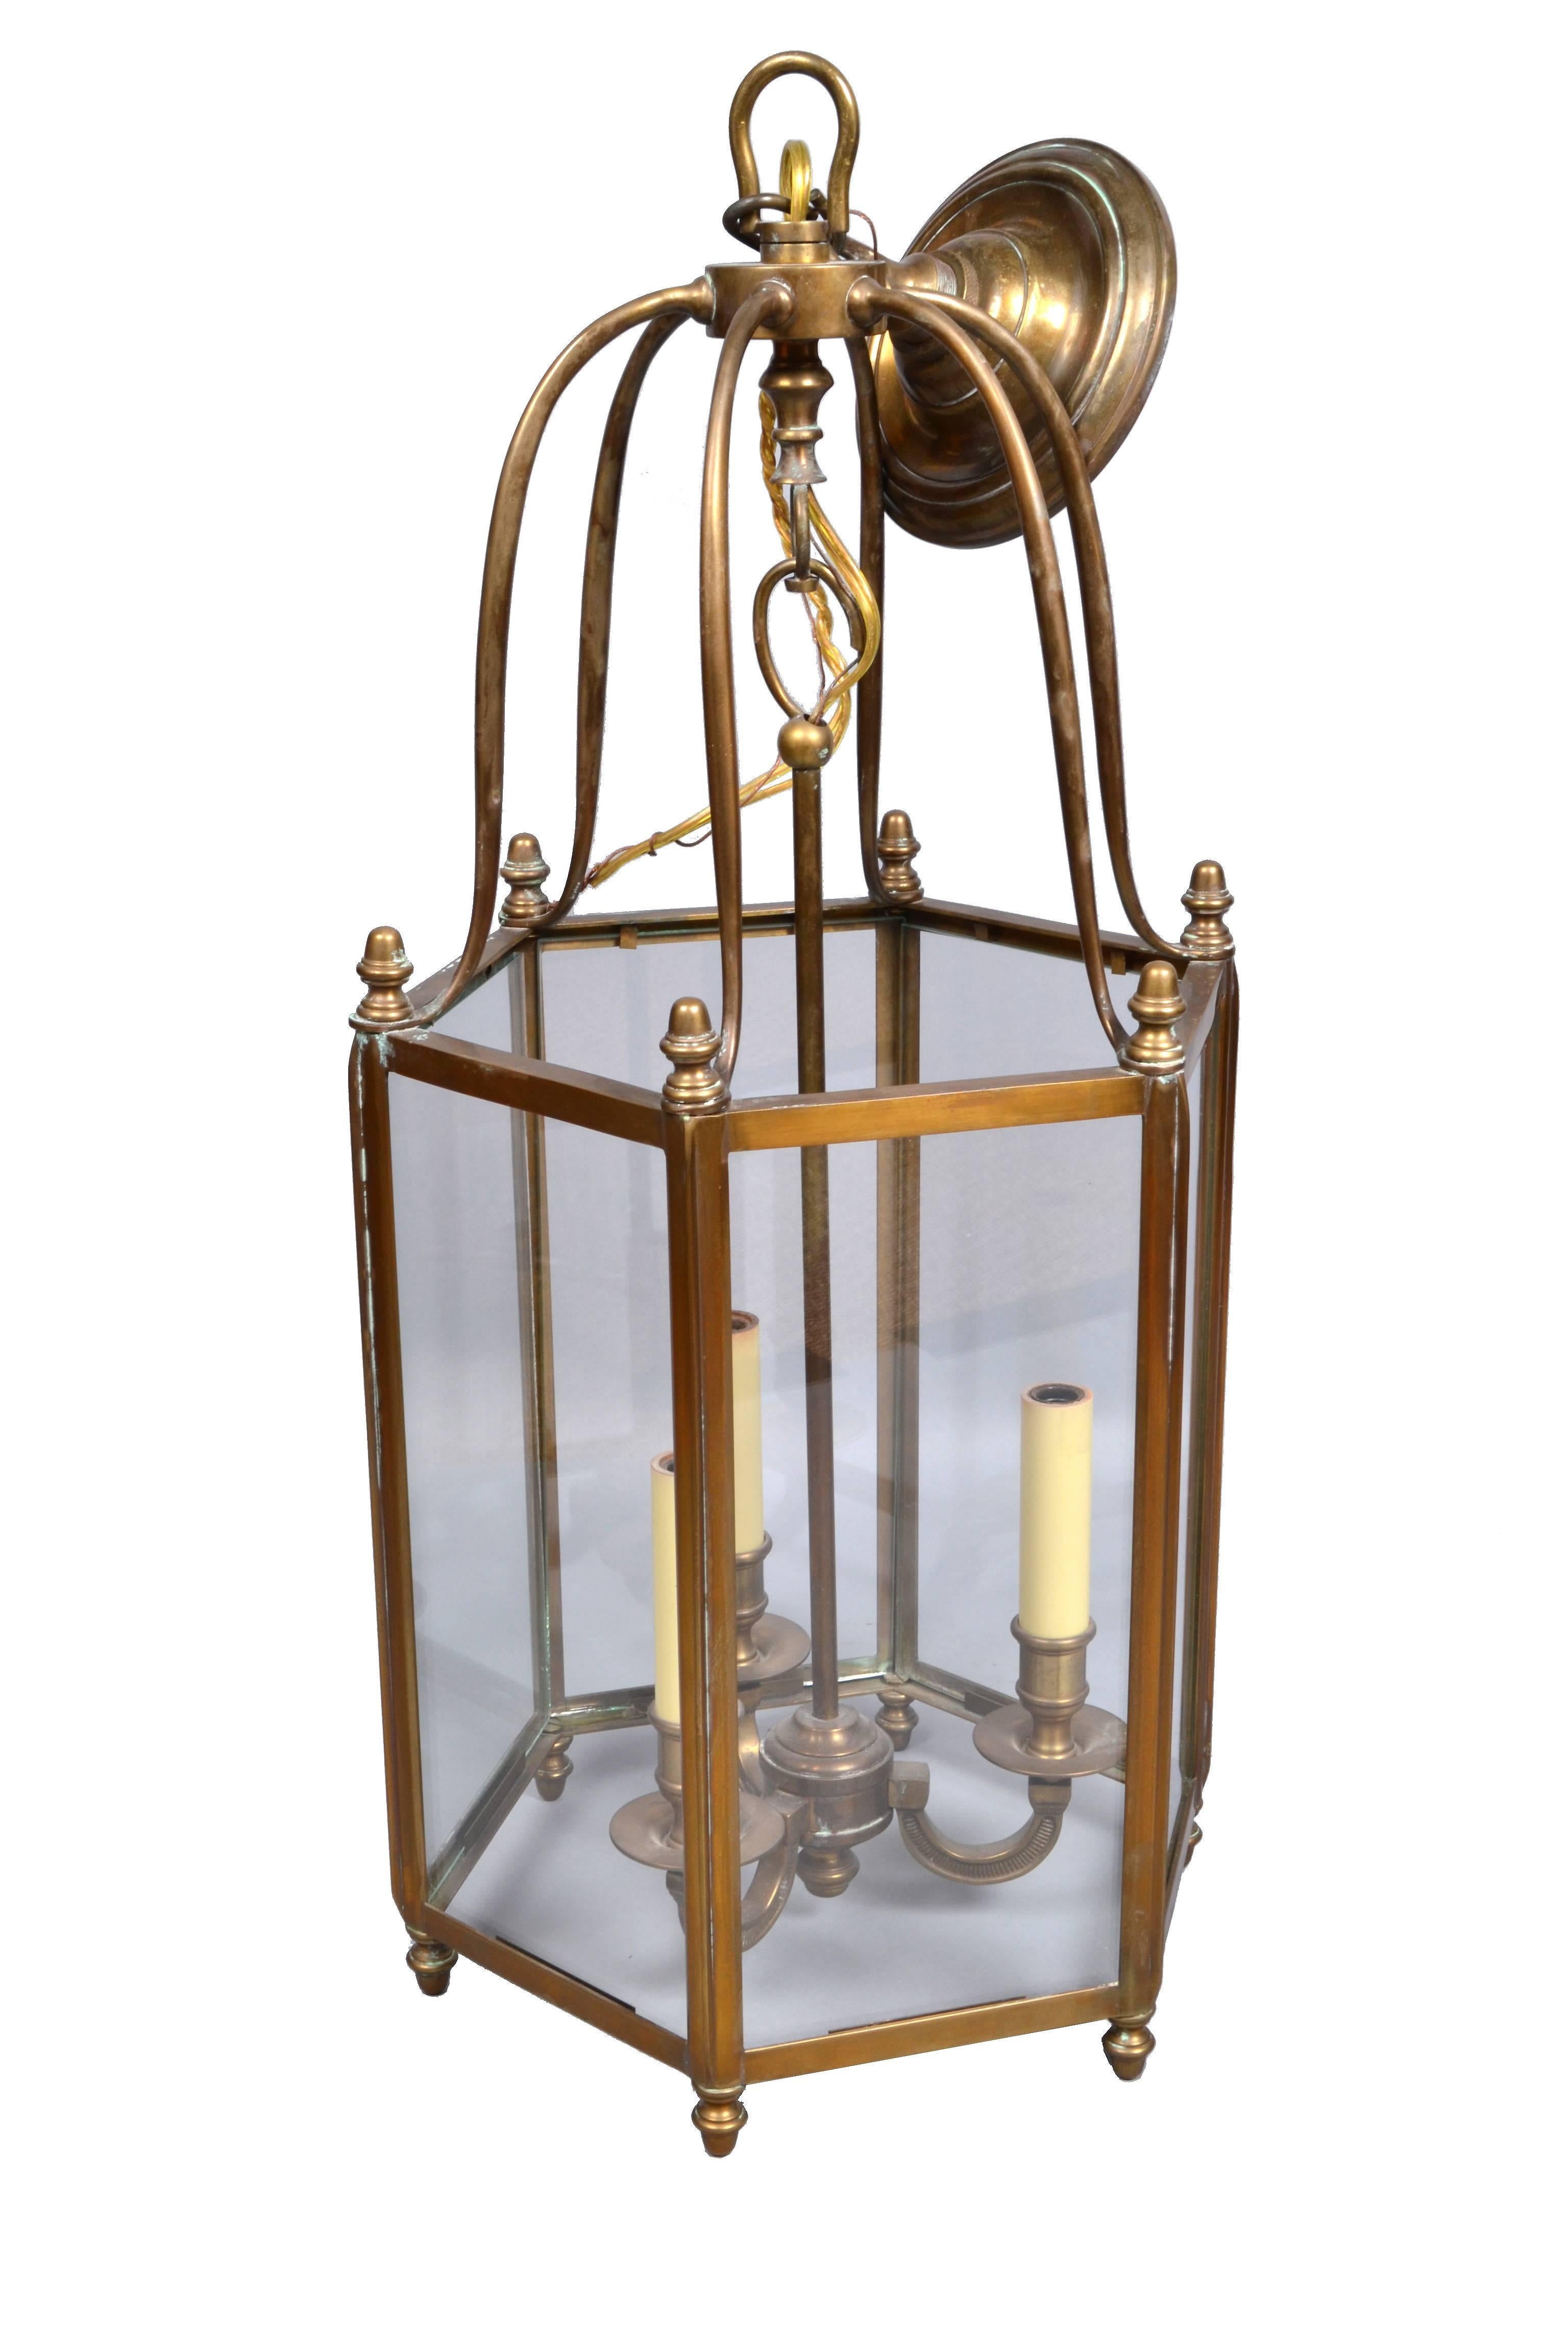 Rustic American Hollywood Regency brass and glass hall lantern three light fixture.
The core is made out of a brass stem, very detailed.
Wired for the U.S. and uses three light bulbs 40 watts.
